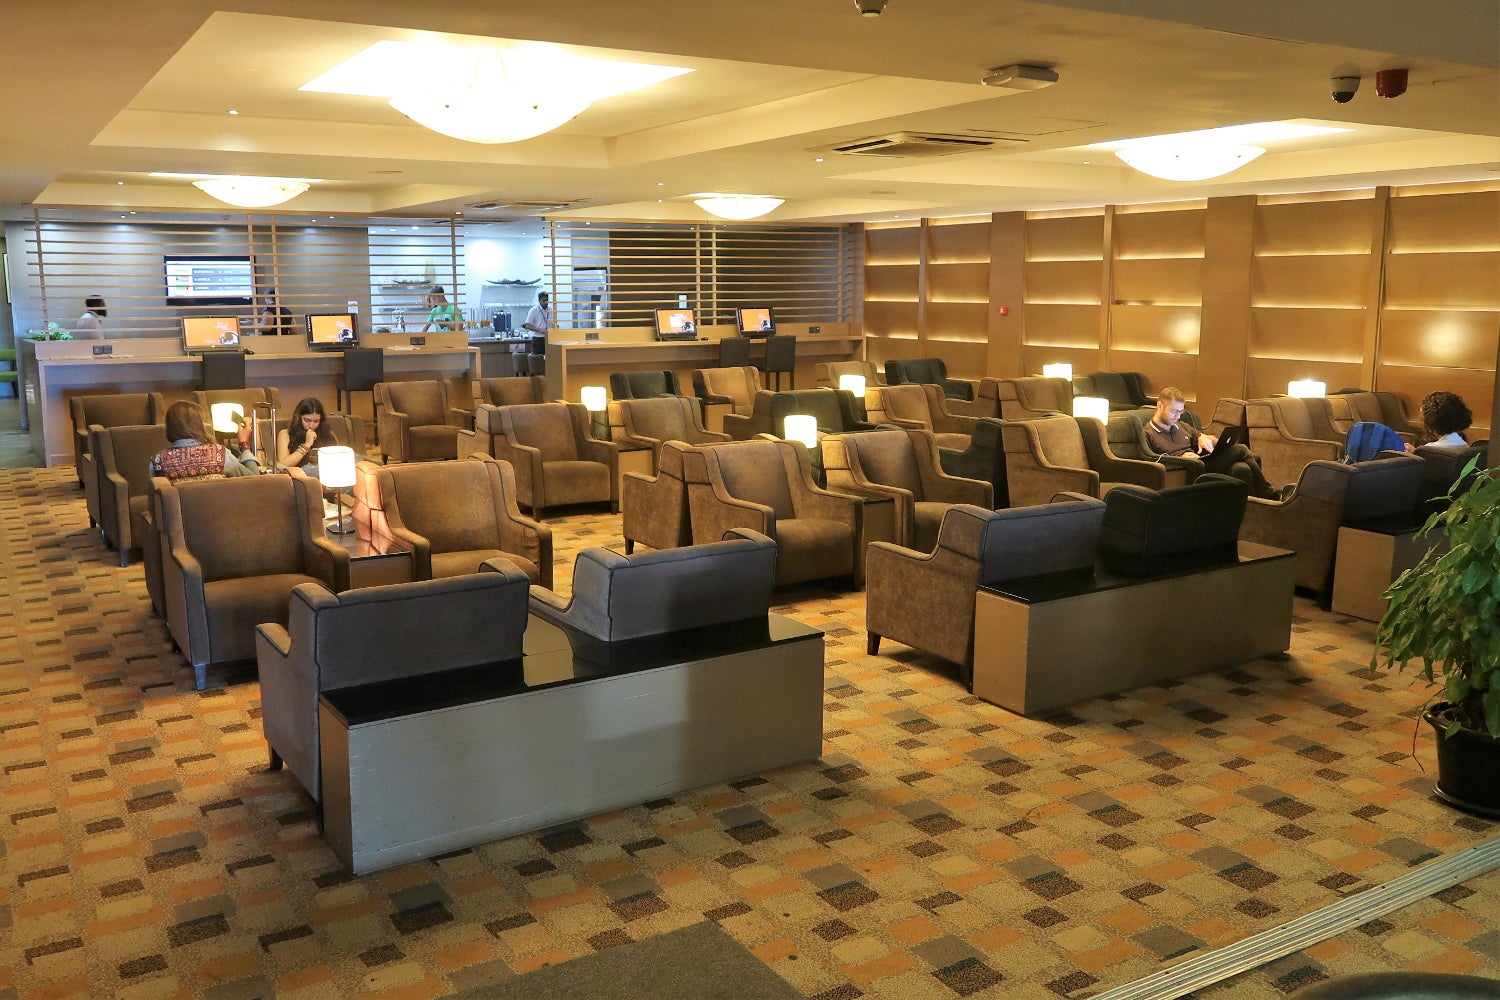 International Review: Guy Leeli at Male Points - The Airport (MLE) Lounge The